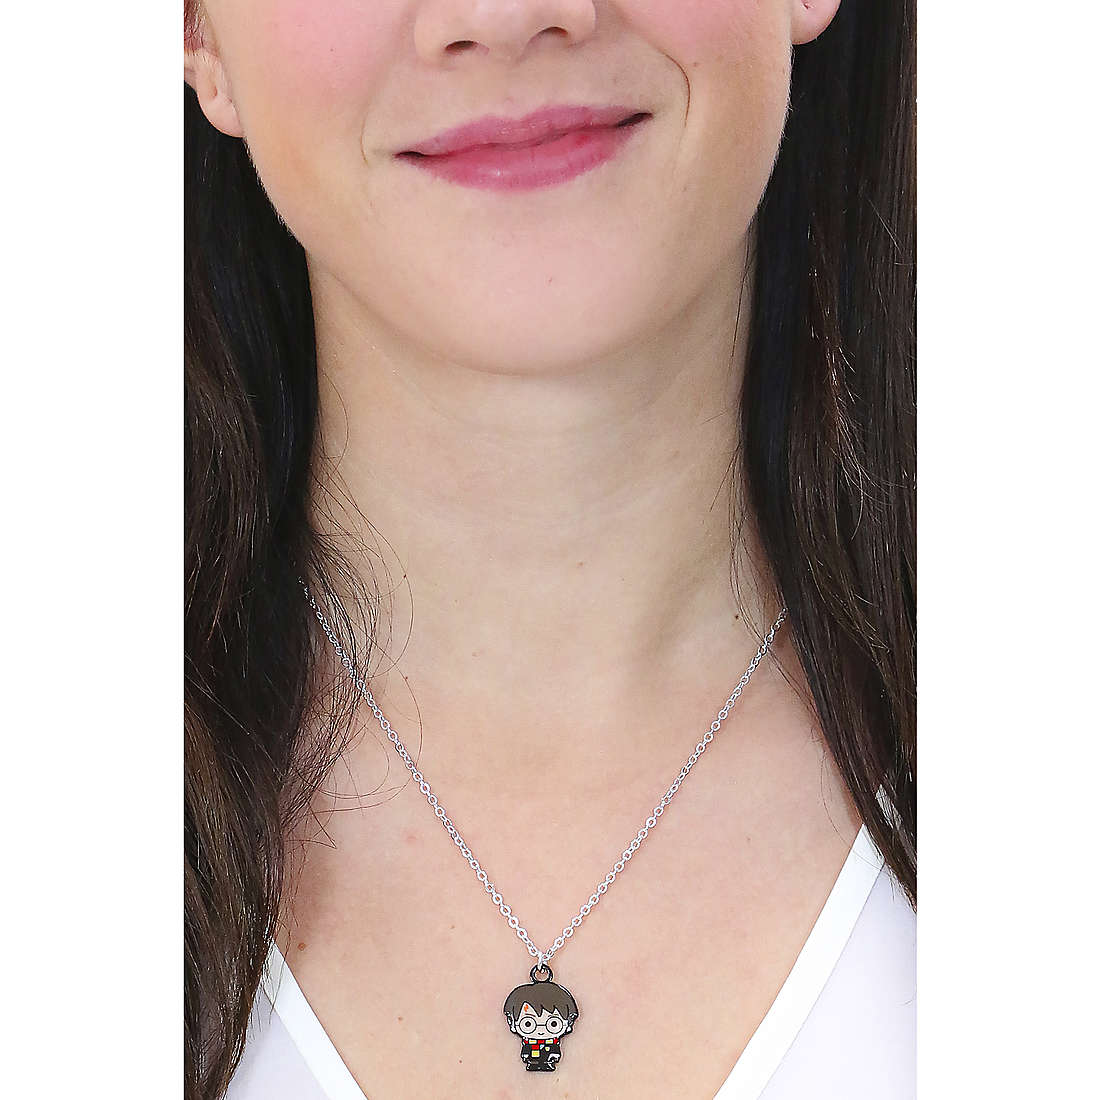 Harry Potter necklaces woman WNCX0082 wearing